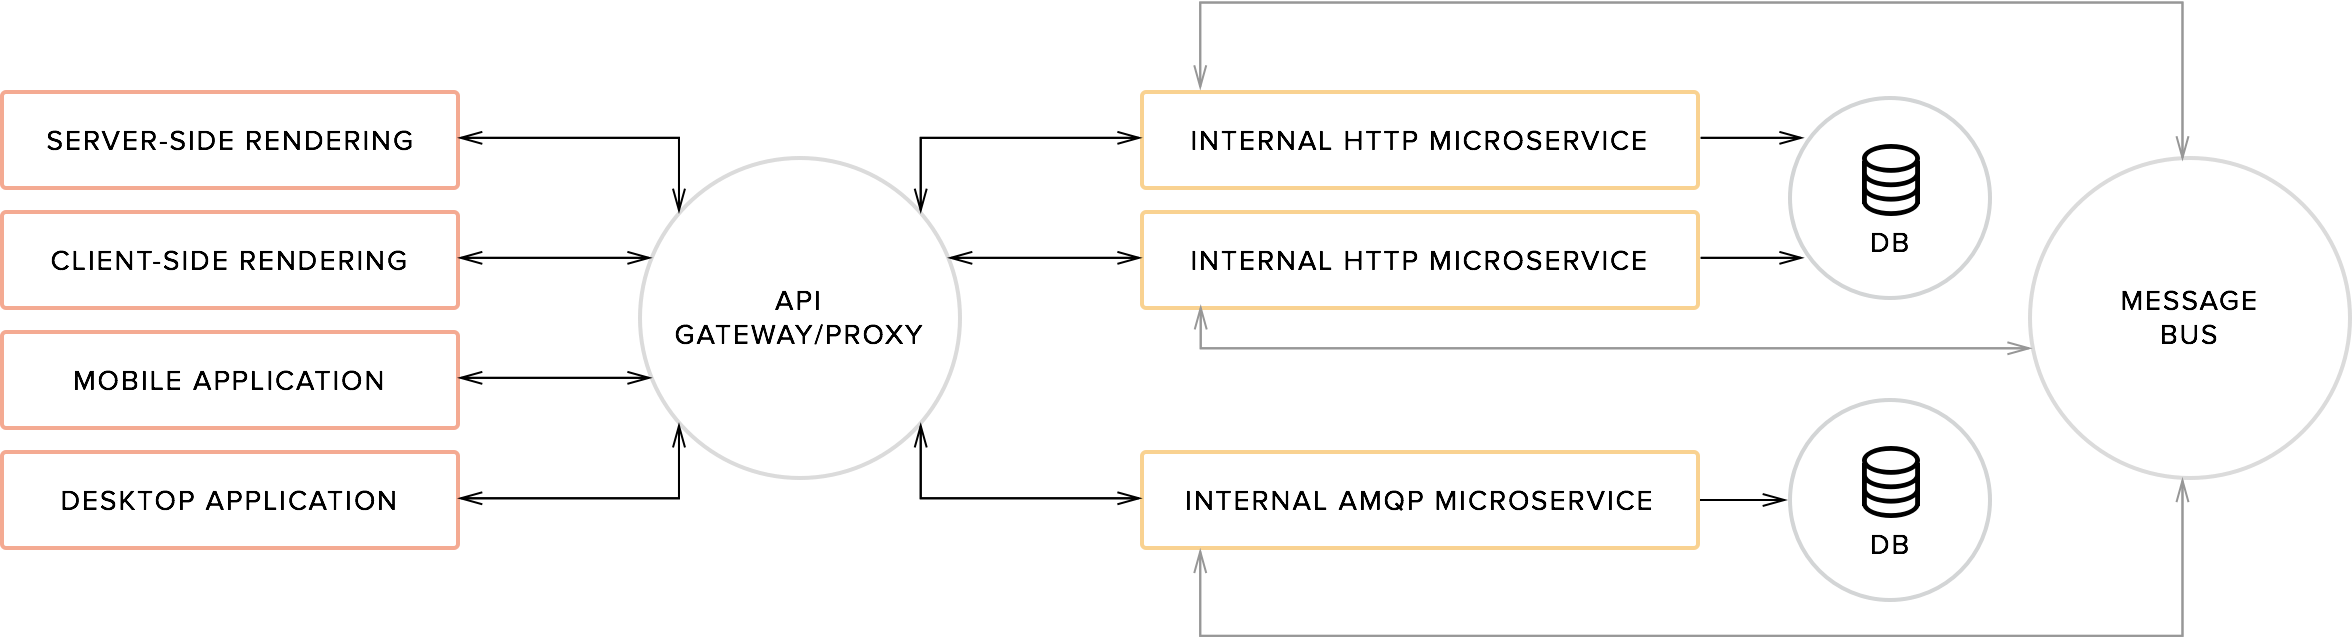 Typical microservices diagram